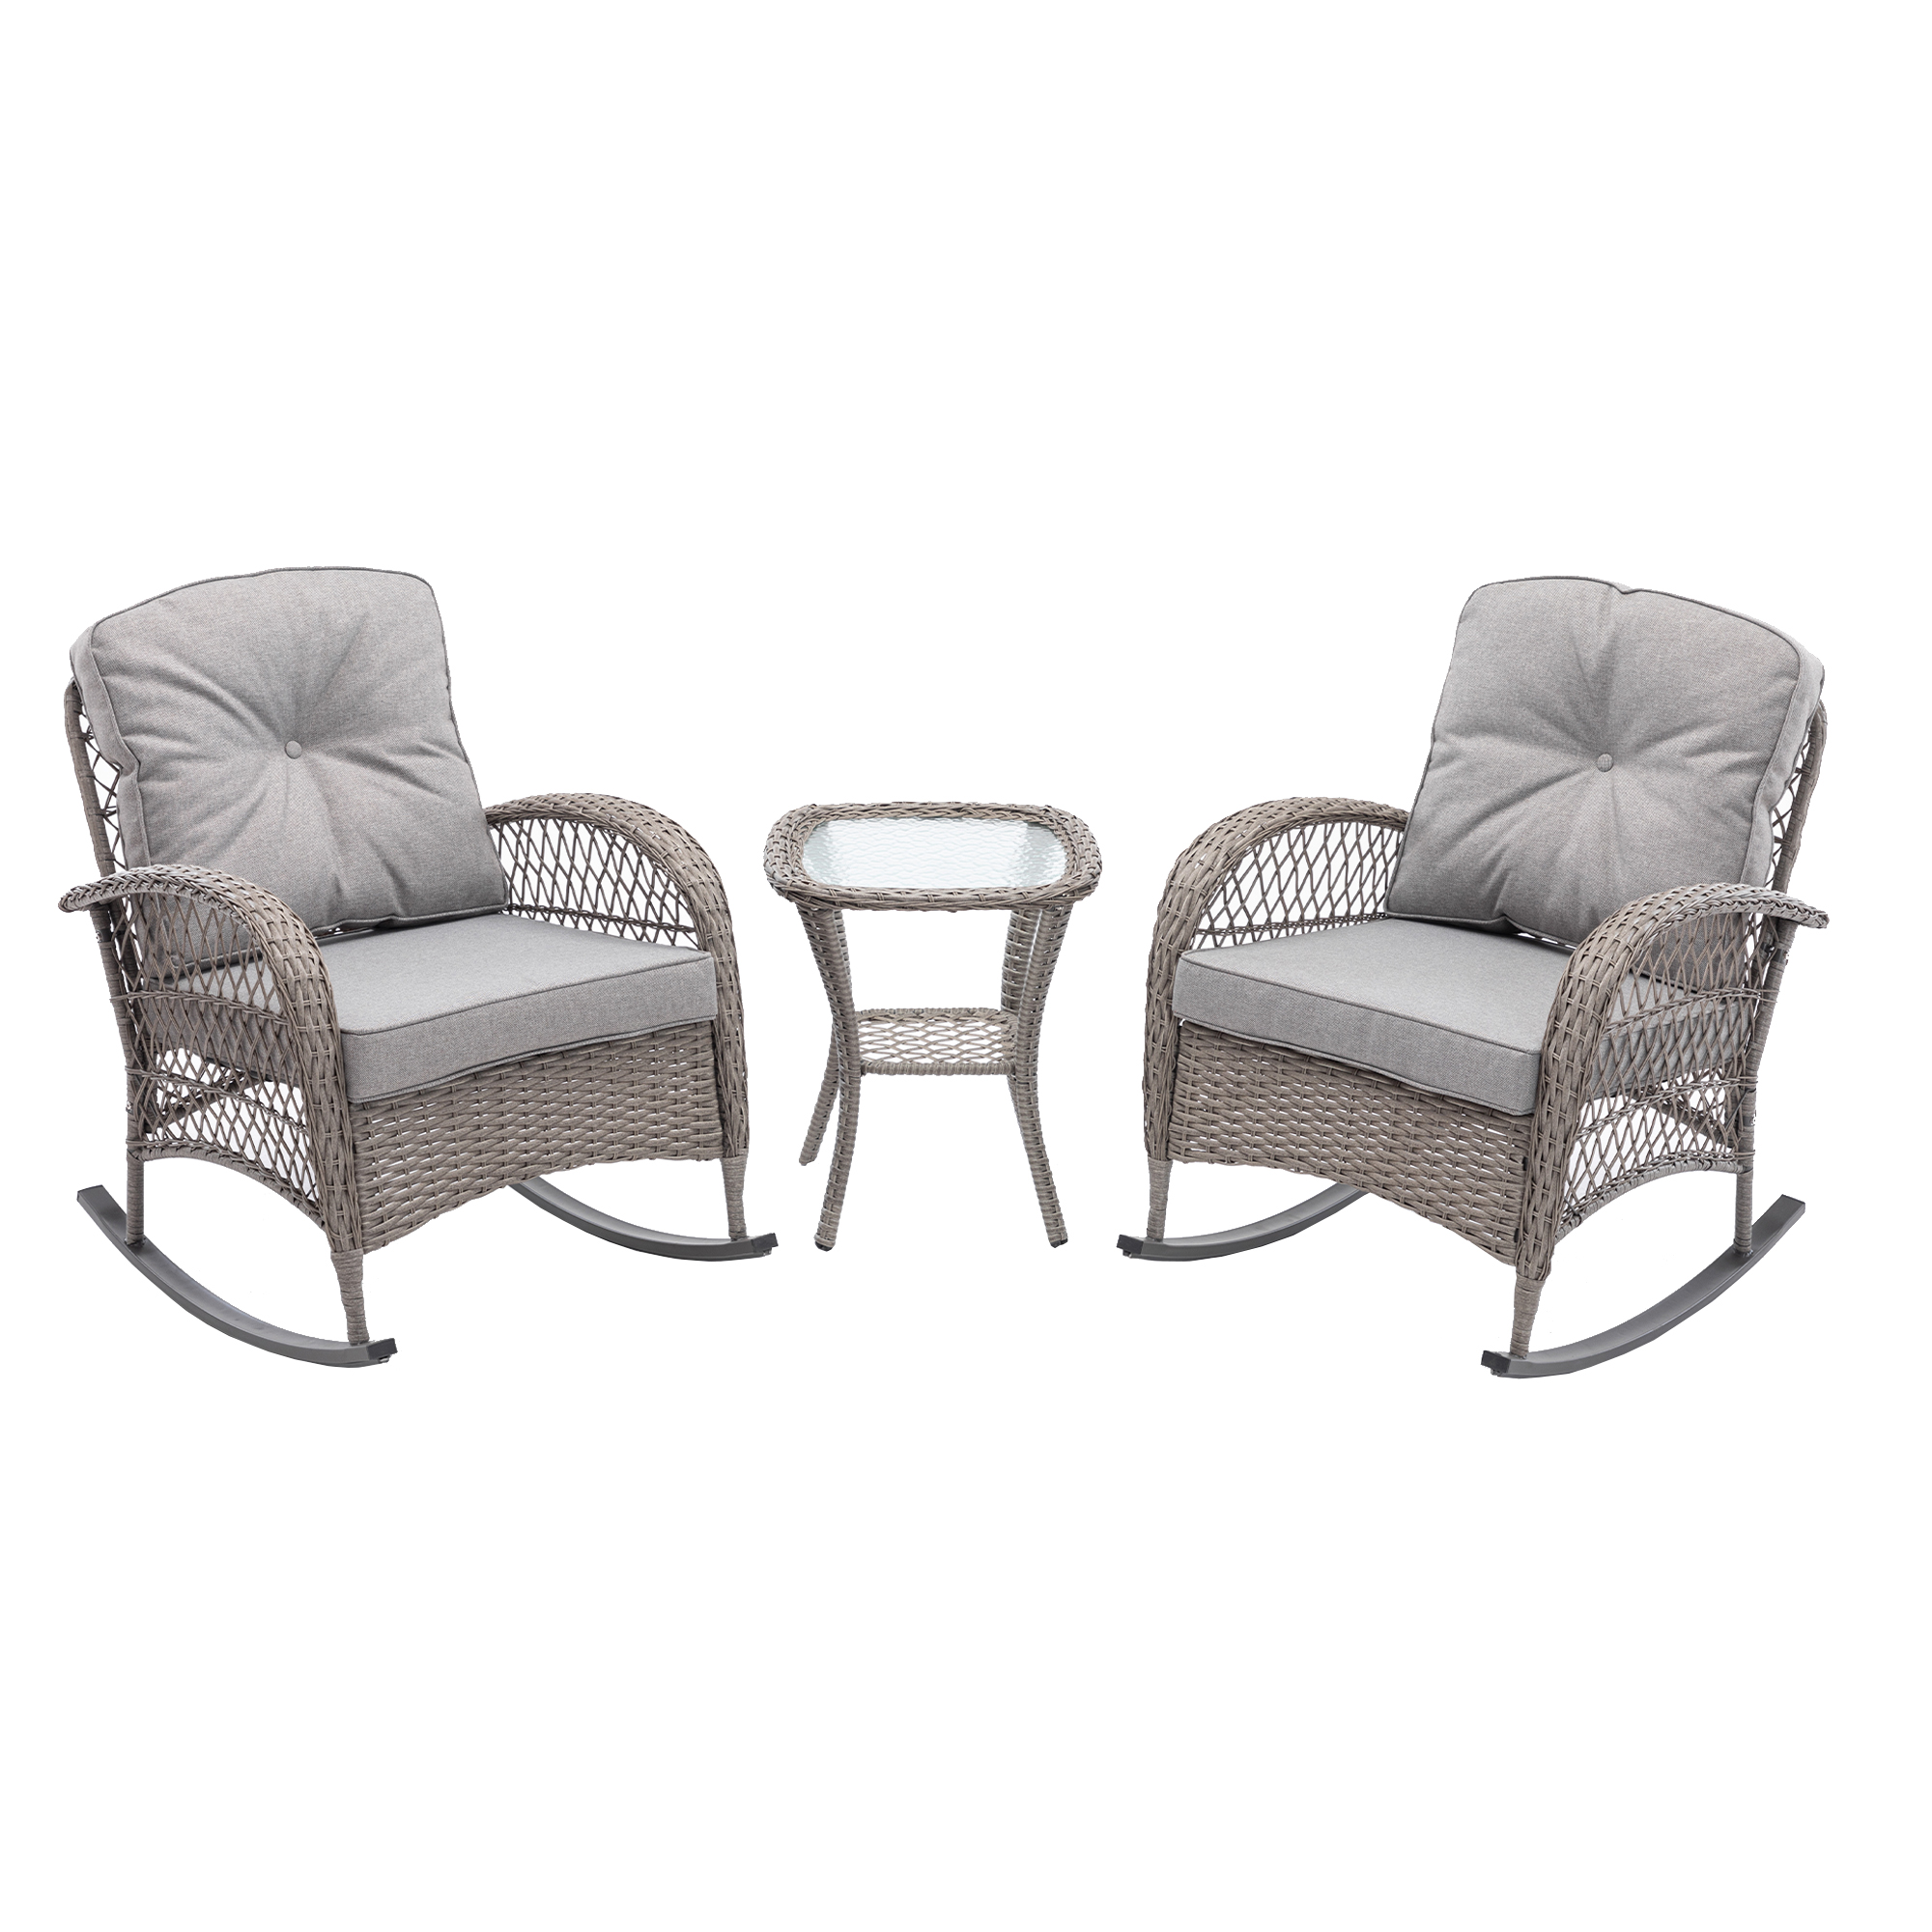 Royard Oaktree 3-Piece Patio Rocking Chair Outdoor Rattan Bistro Furniture Conversation Set with 2 Wicker Armchair and Glass Table for Porch Lawn Garden Backyard,Grey - image 2 of 7